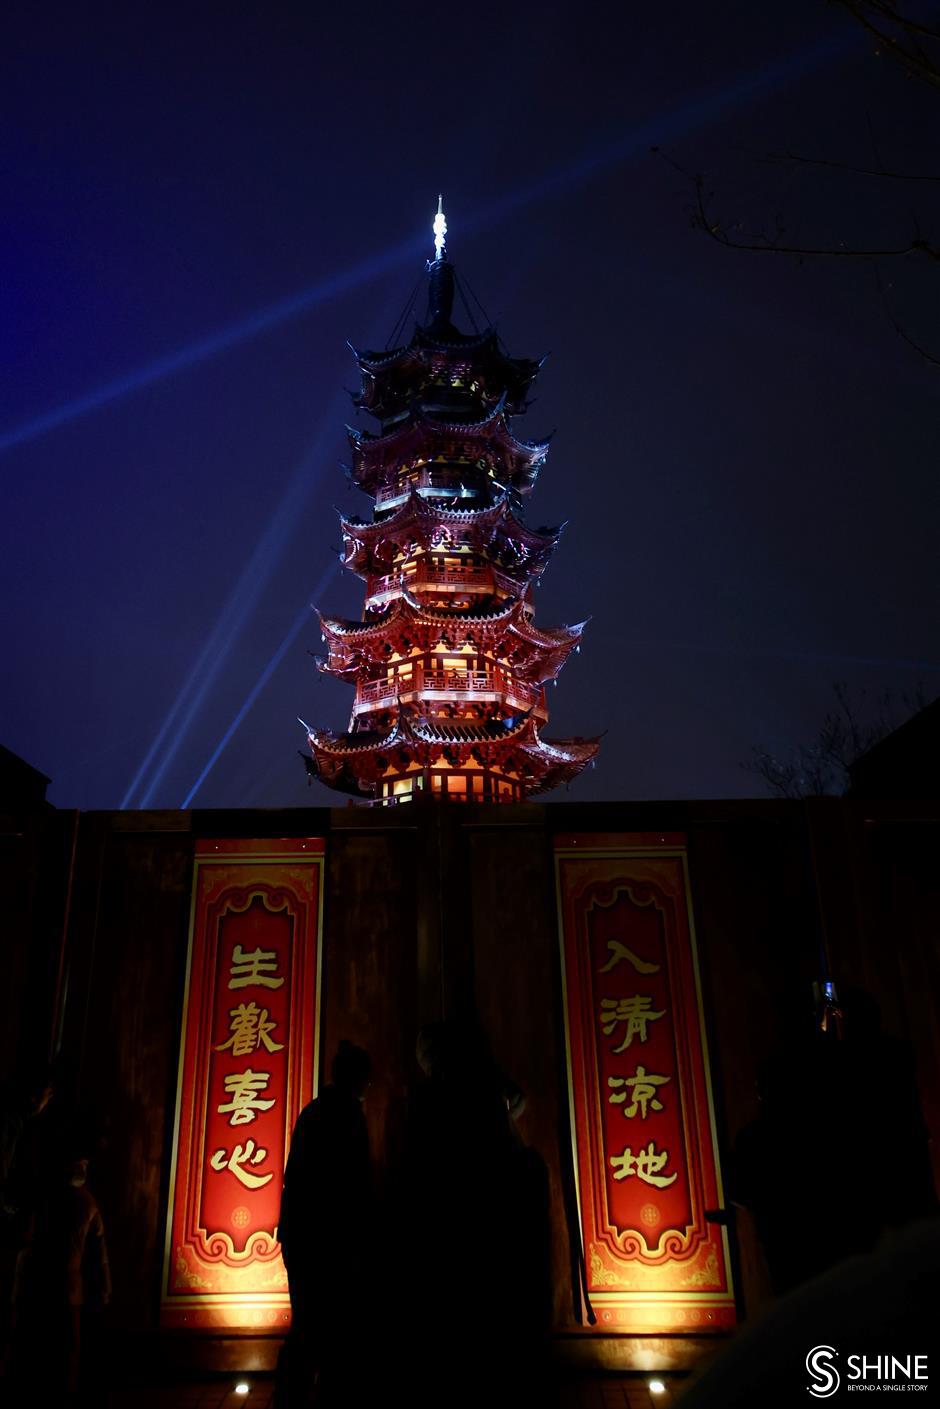 Ringing in the New Year at Longhua Temple